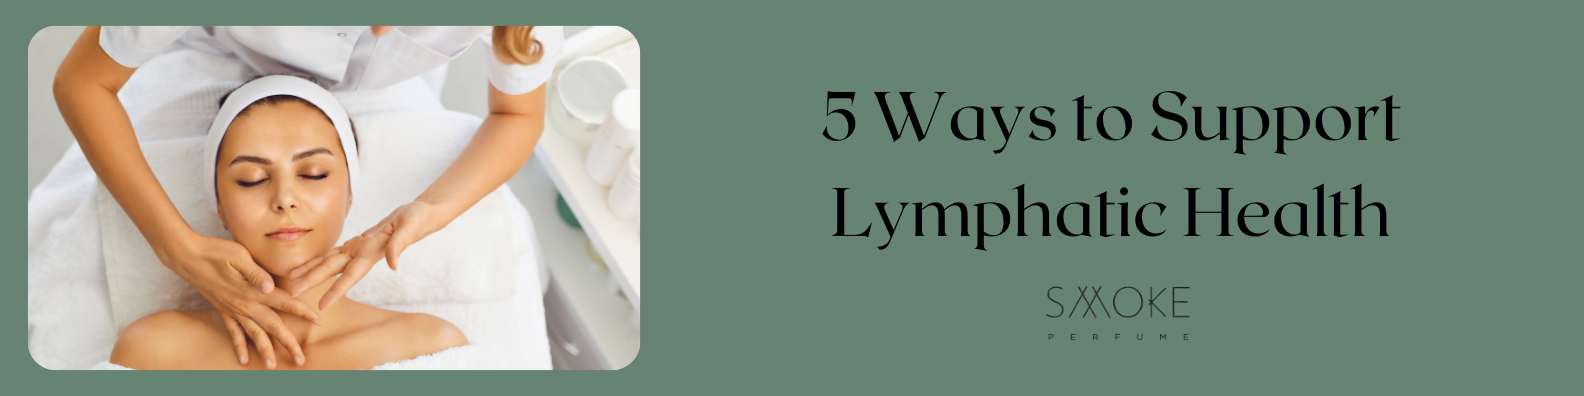 5 Ways to Support Lymphatic Health